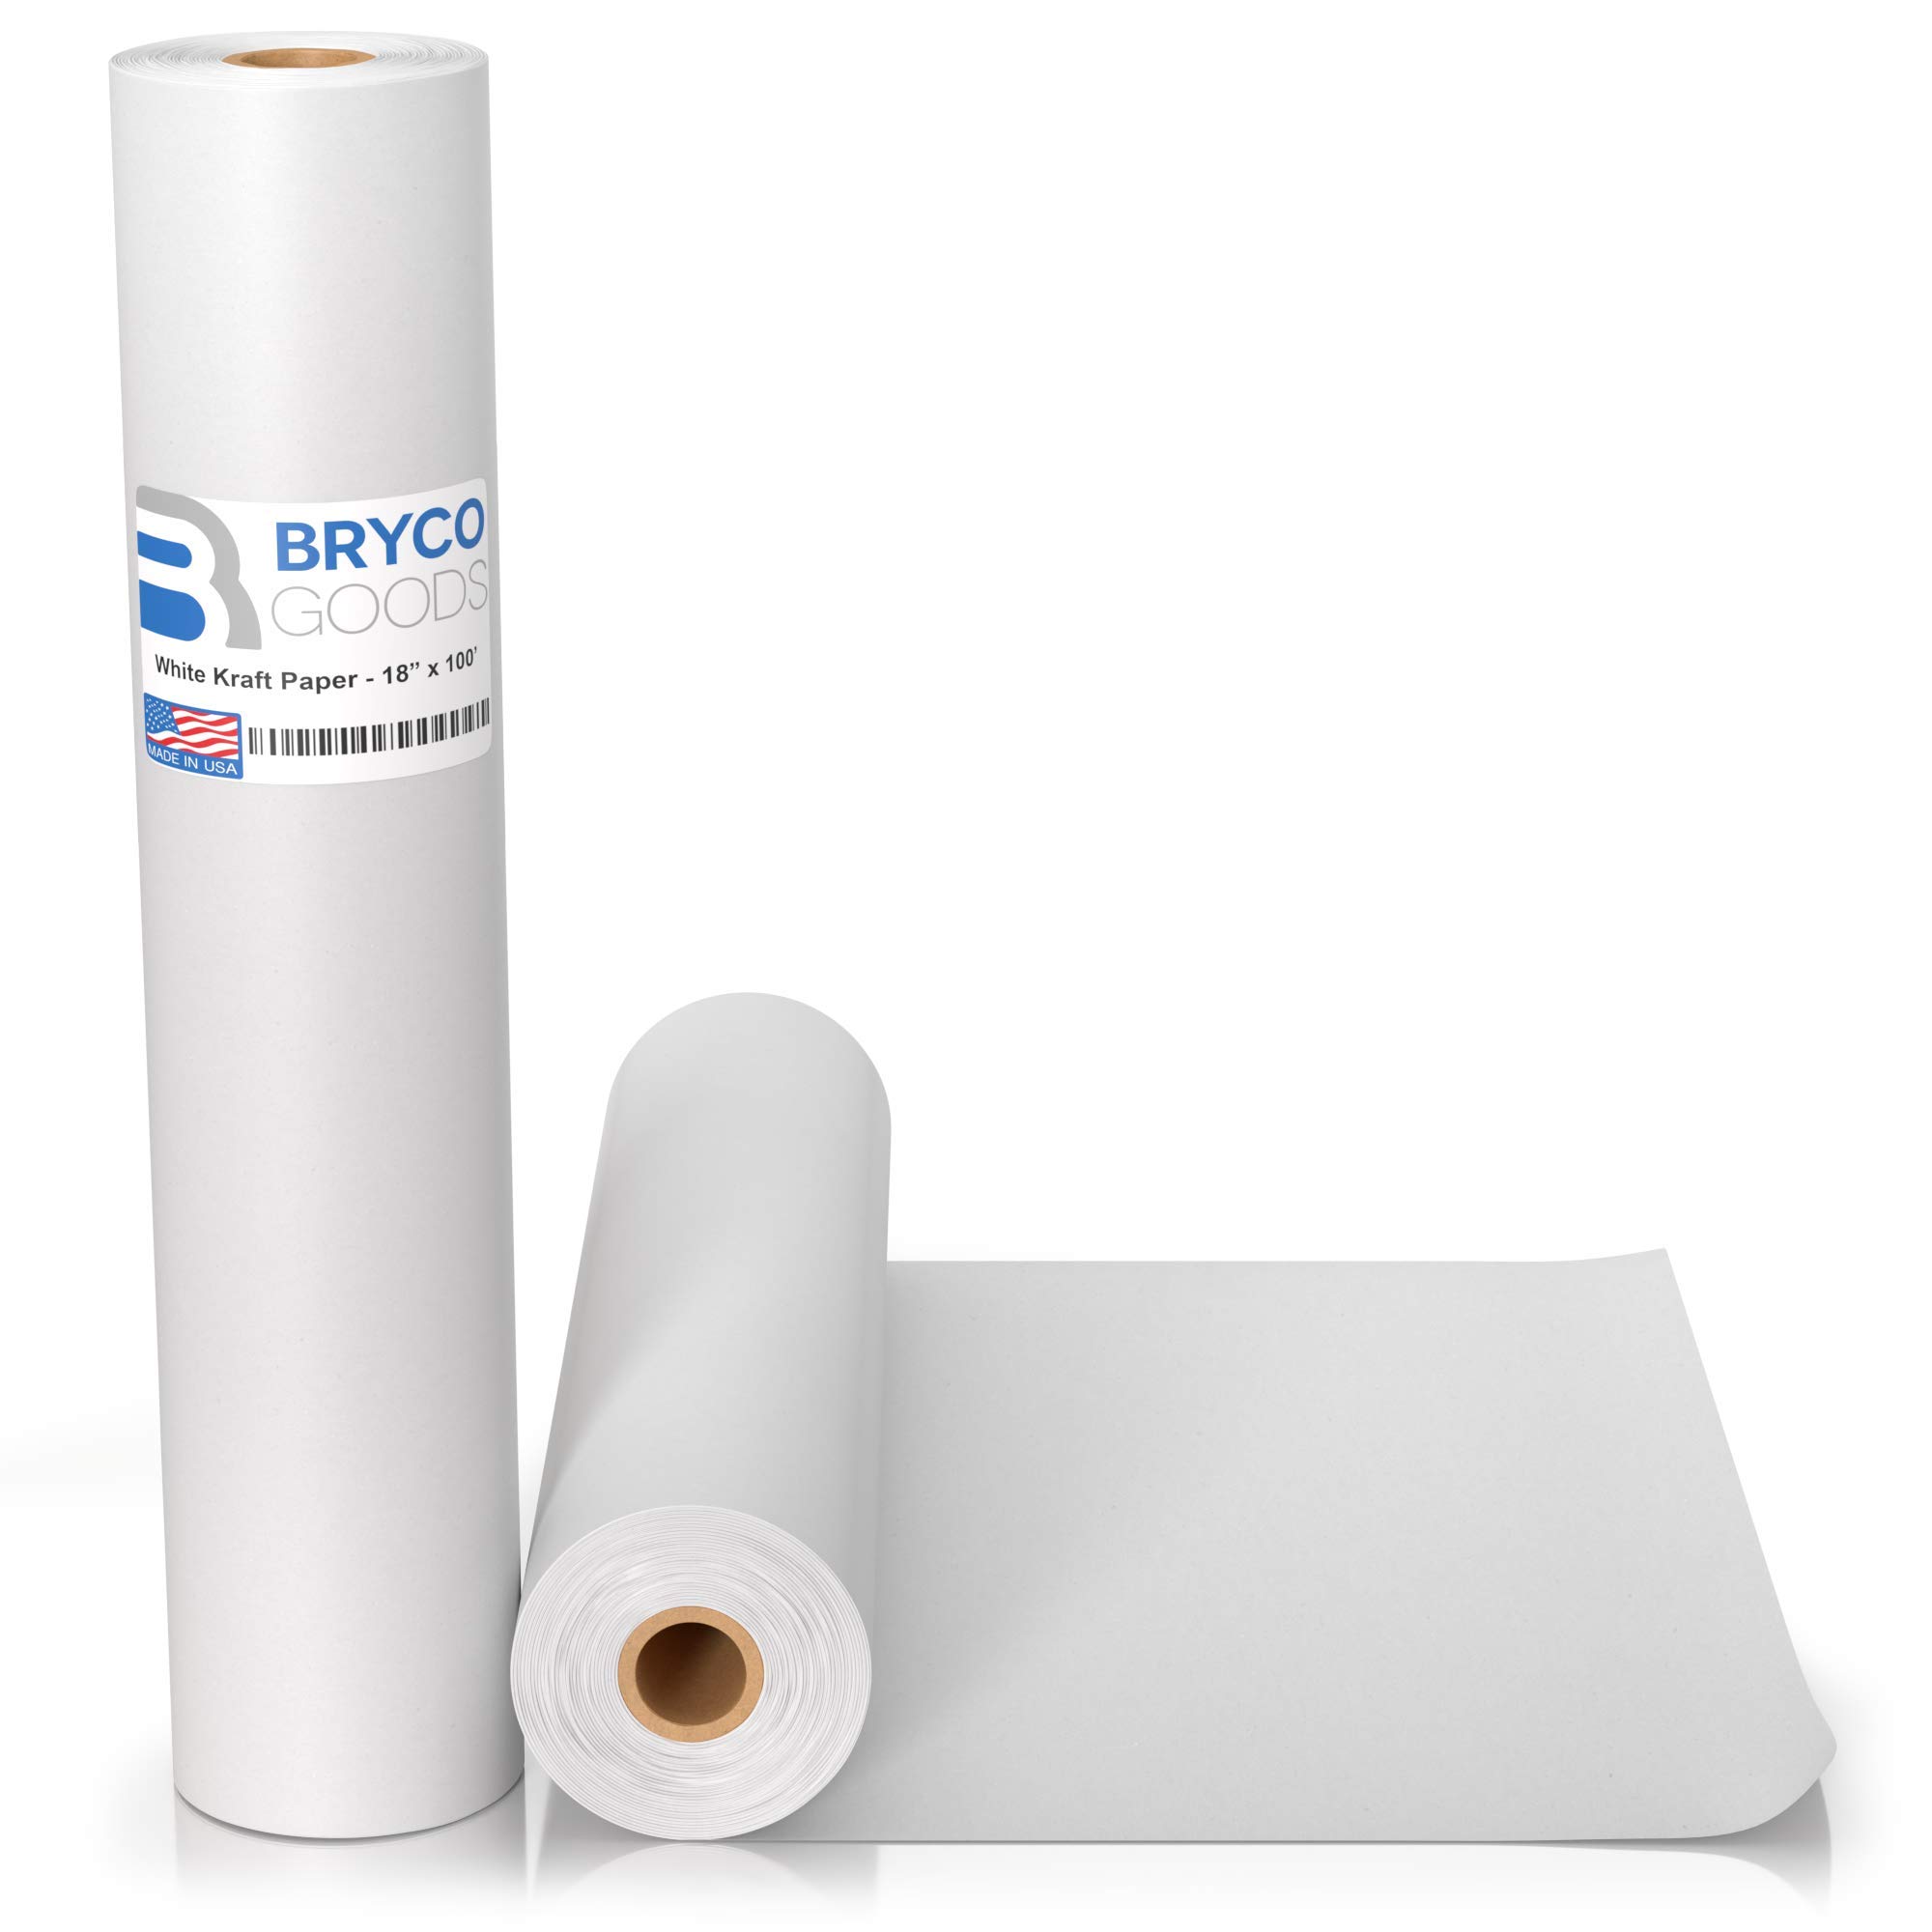 White Kraft Arts and Crafts Paper Roll - 18 inches by 100 Feet